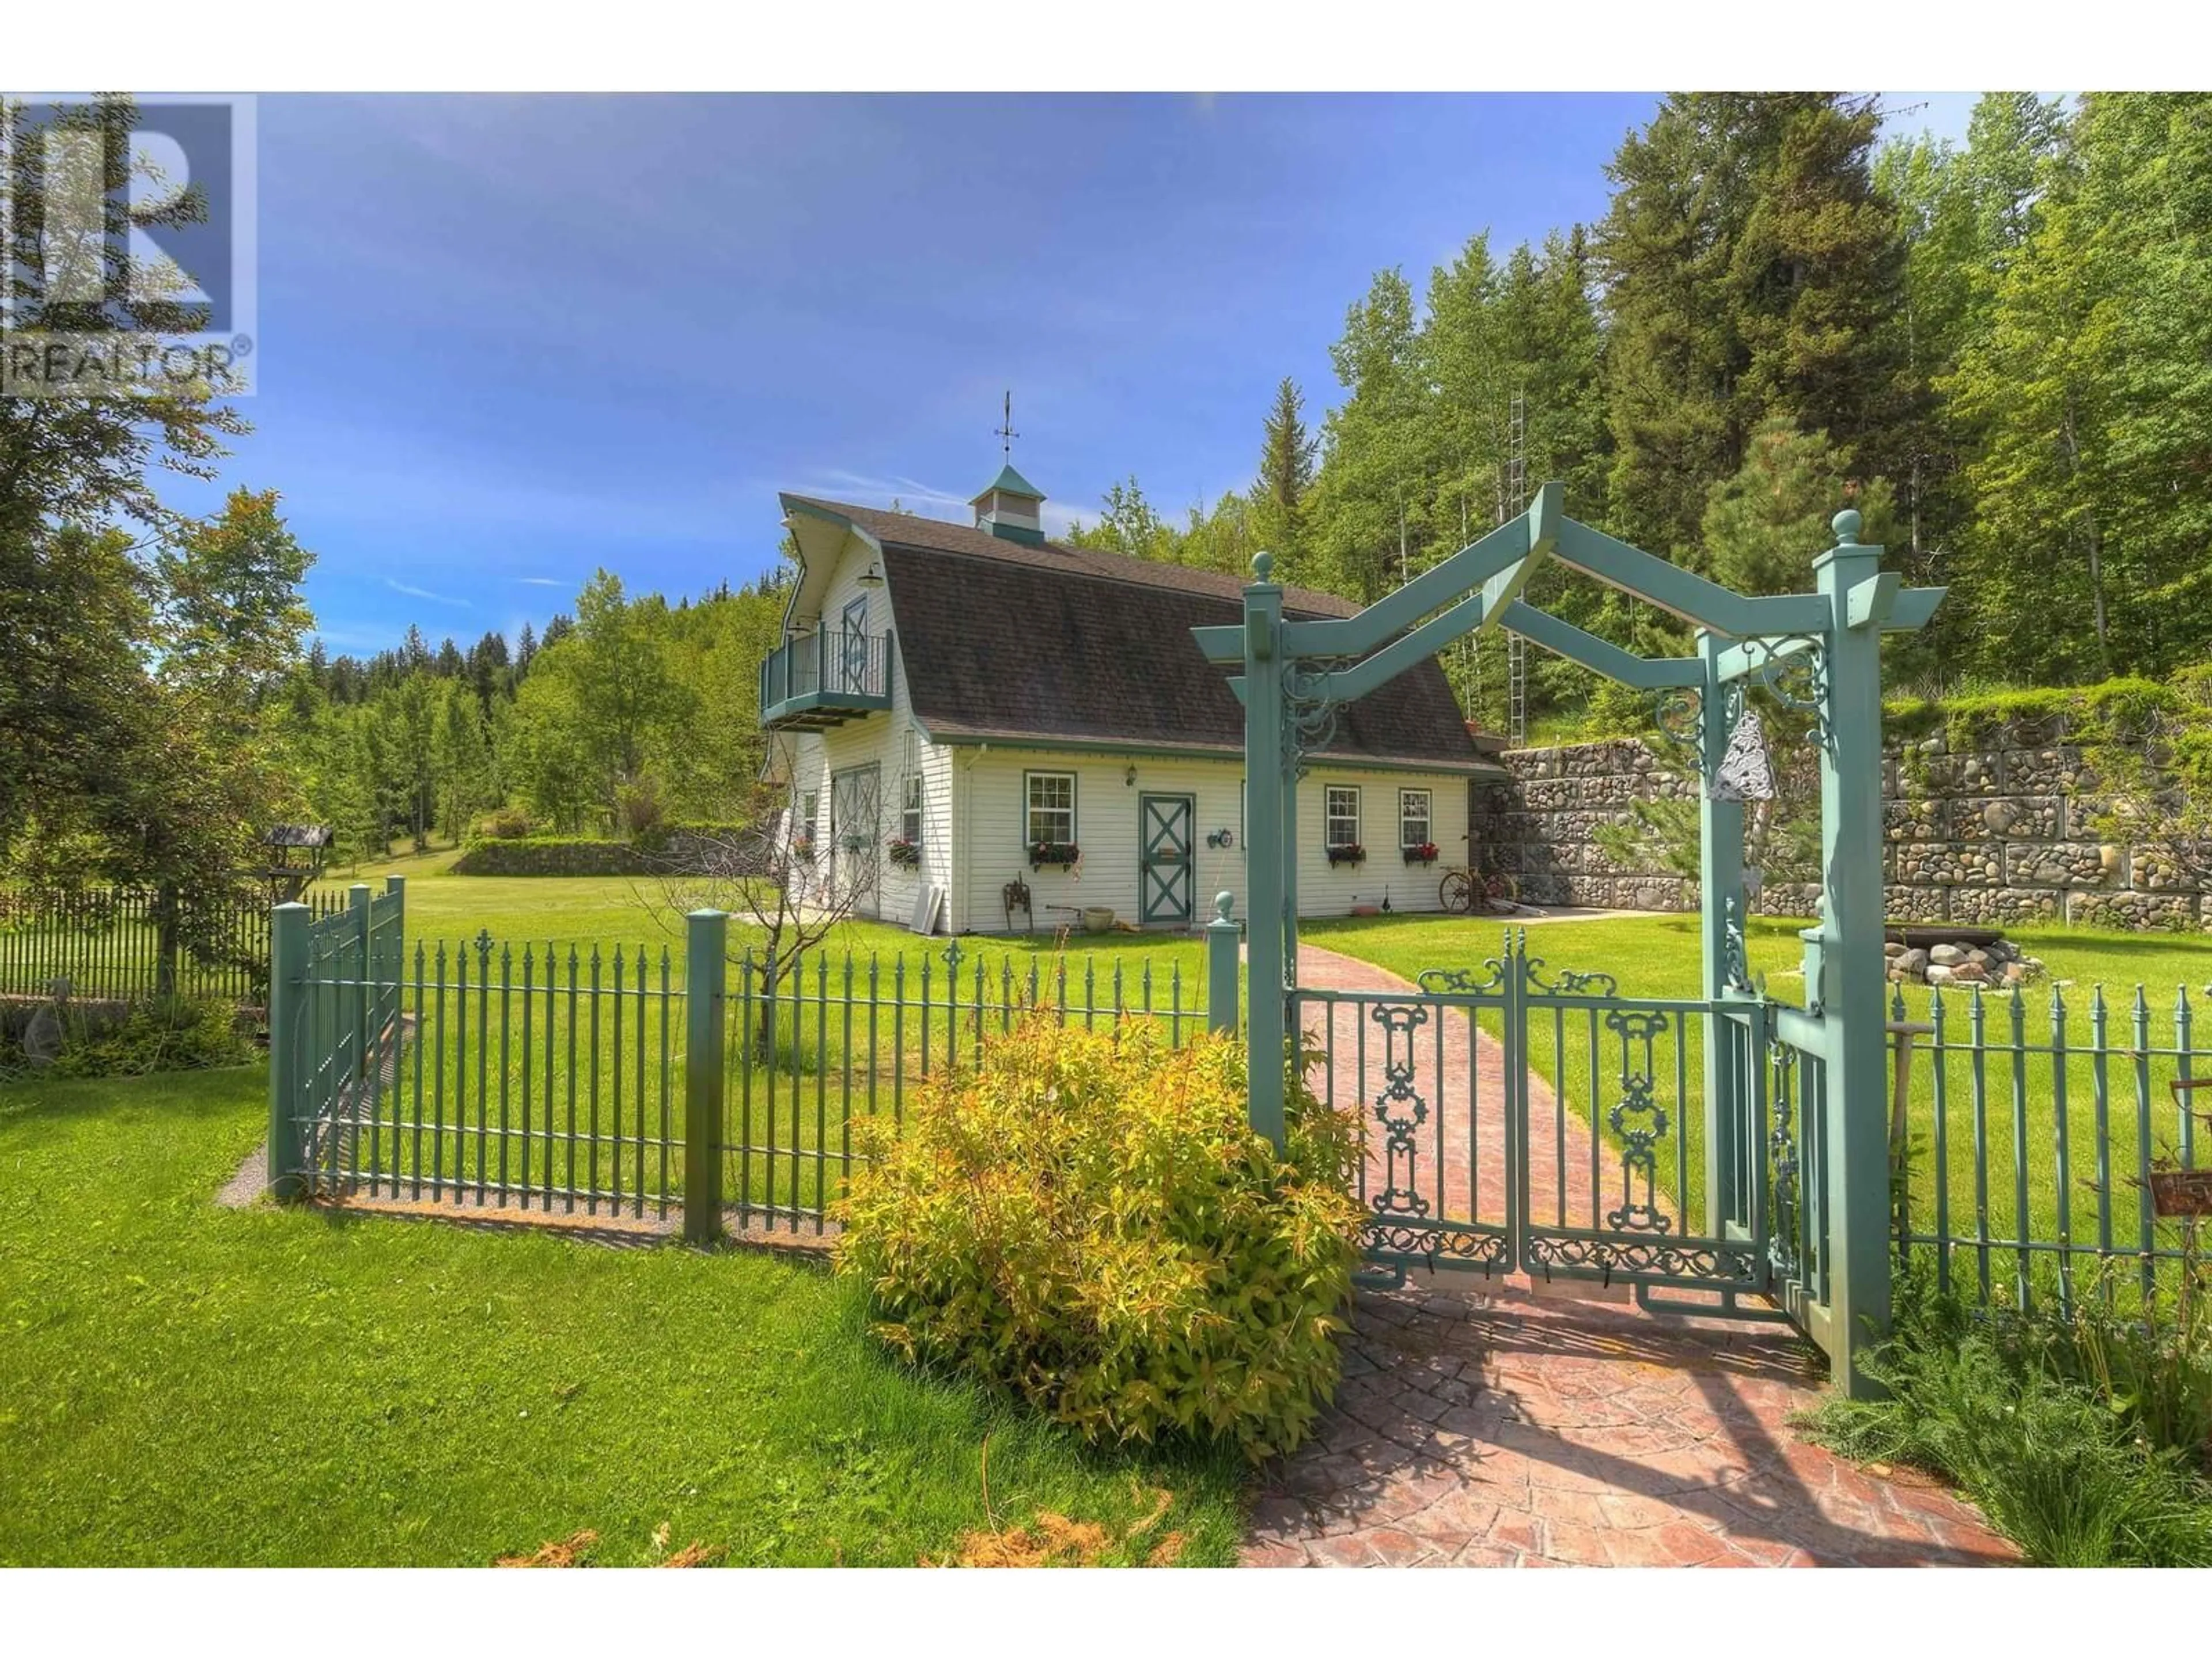 Cottage for 3835 N CARIBOO 97 HIGHWAY, Williams Lake British Columbia V2G5A3